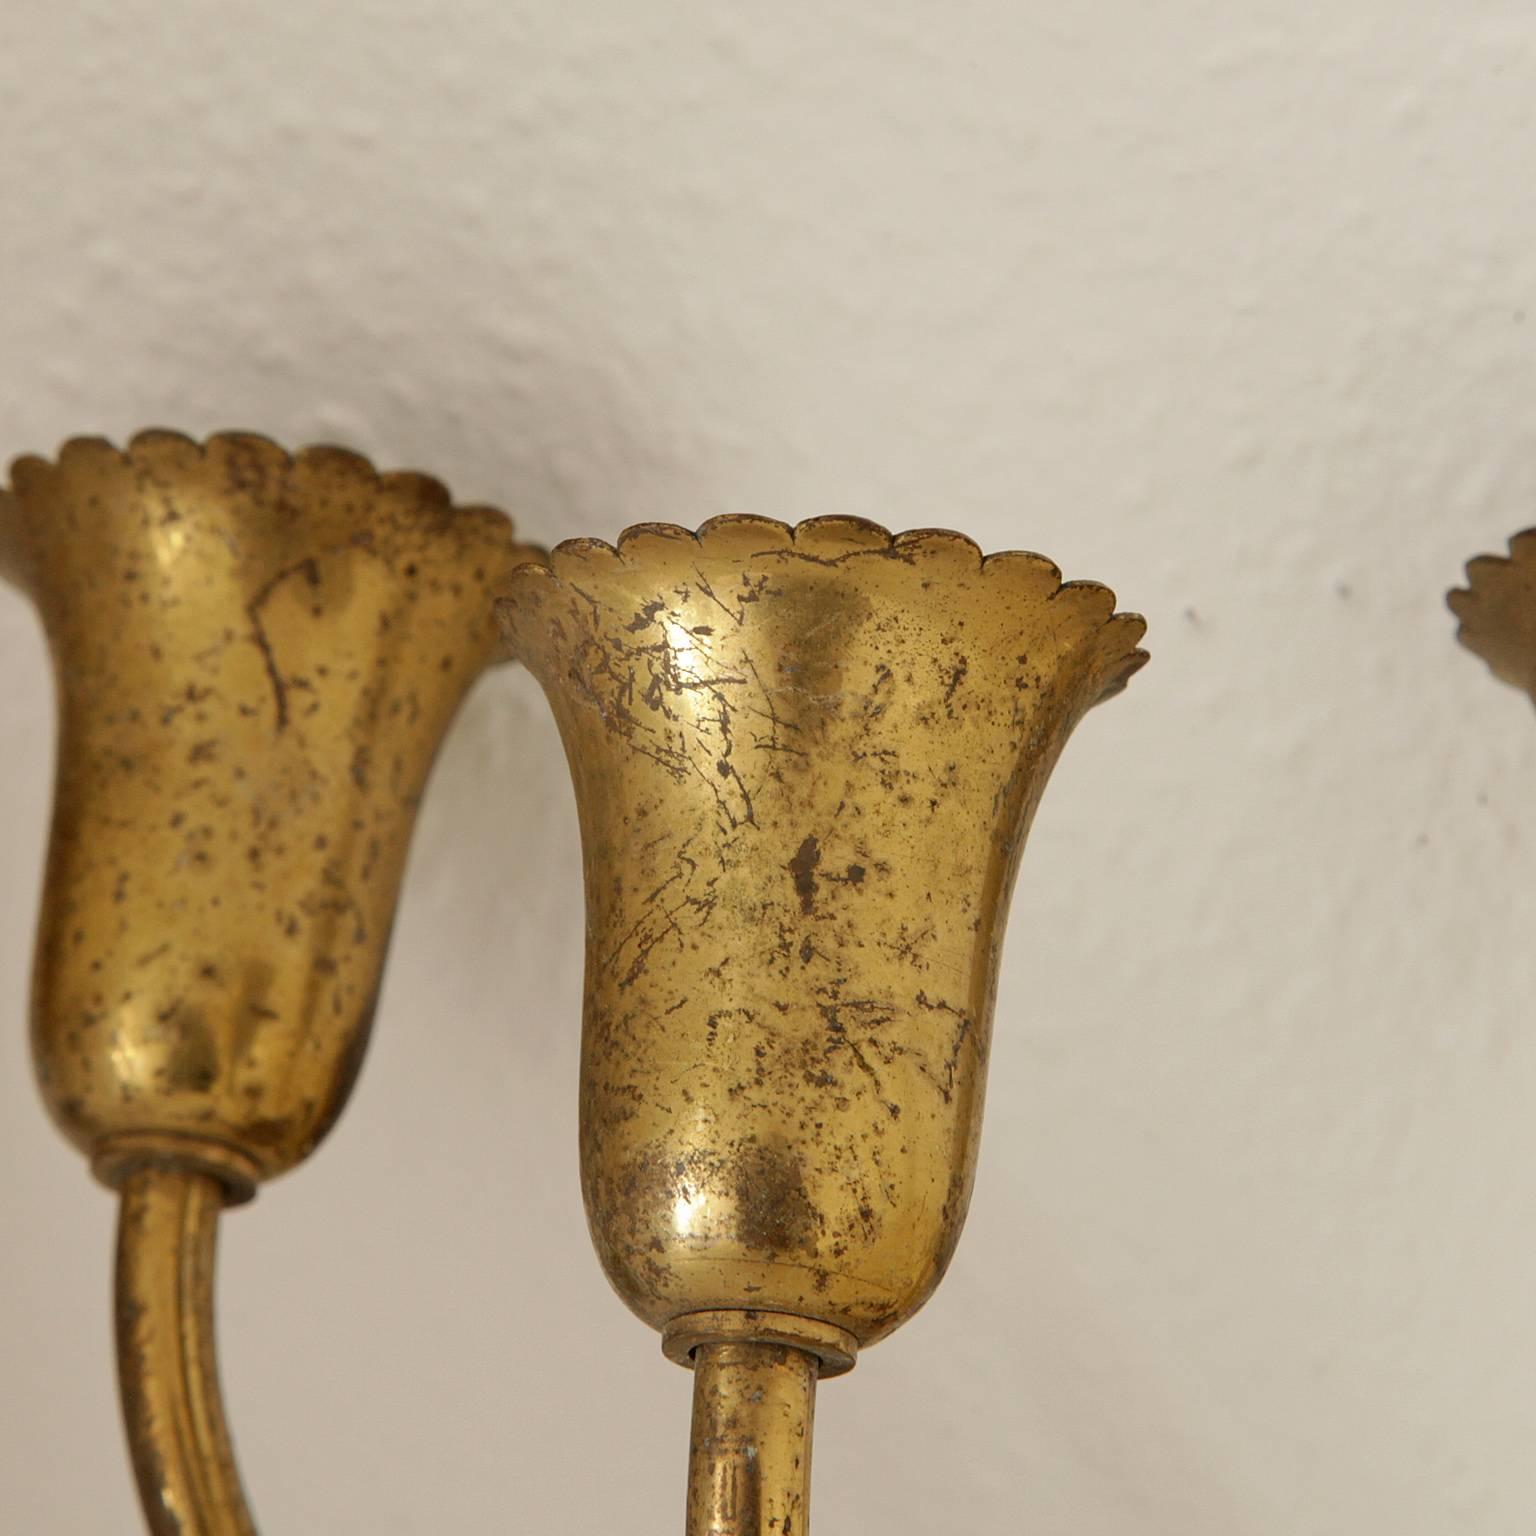 Pair of brass sconces with three arms each in the shape of stylized tulips.